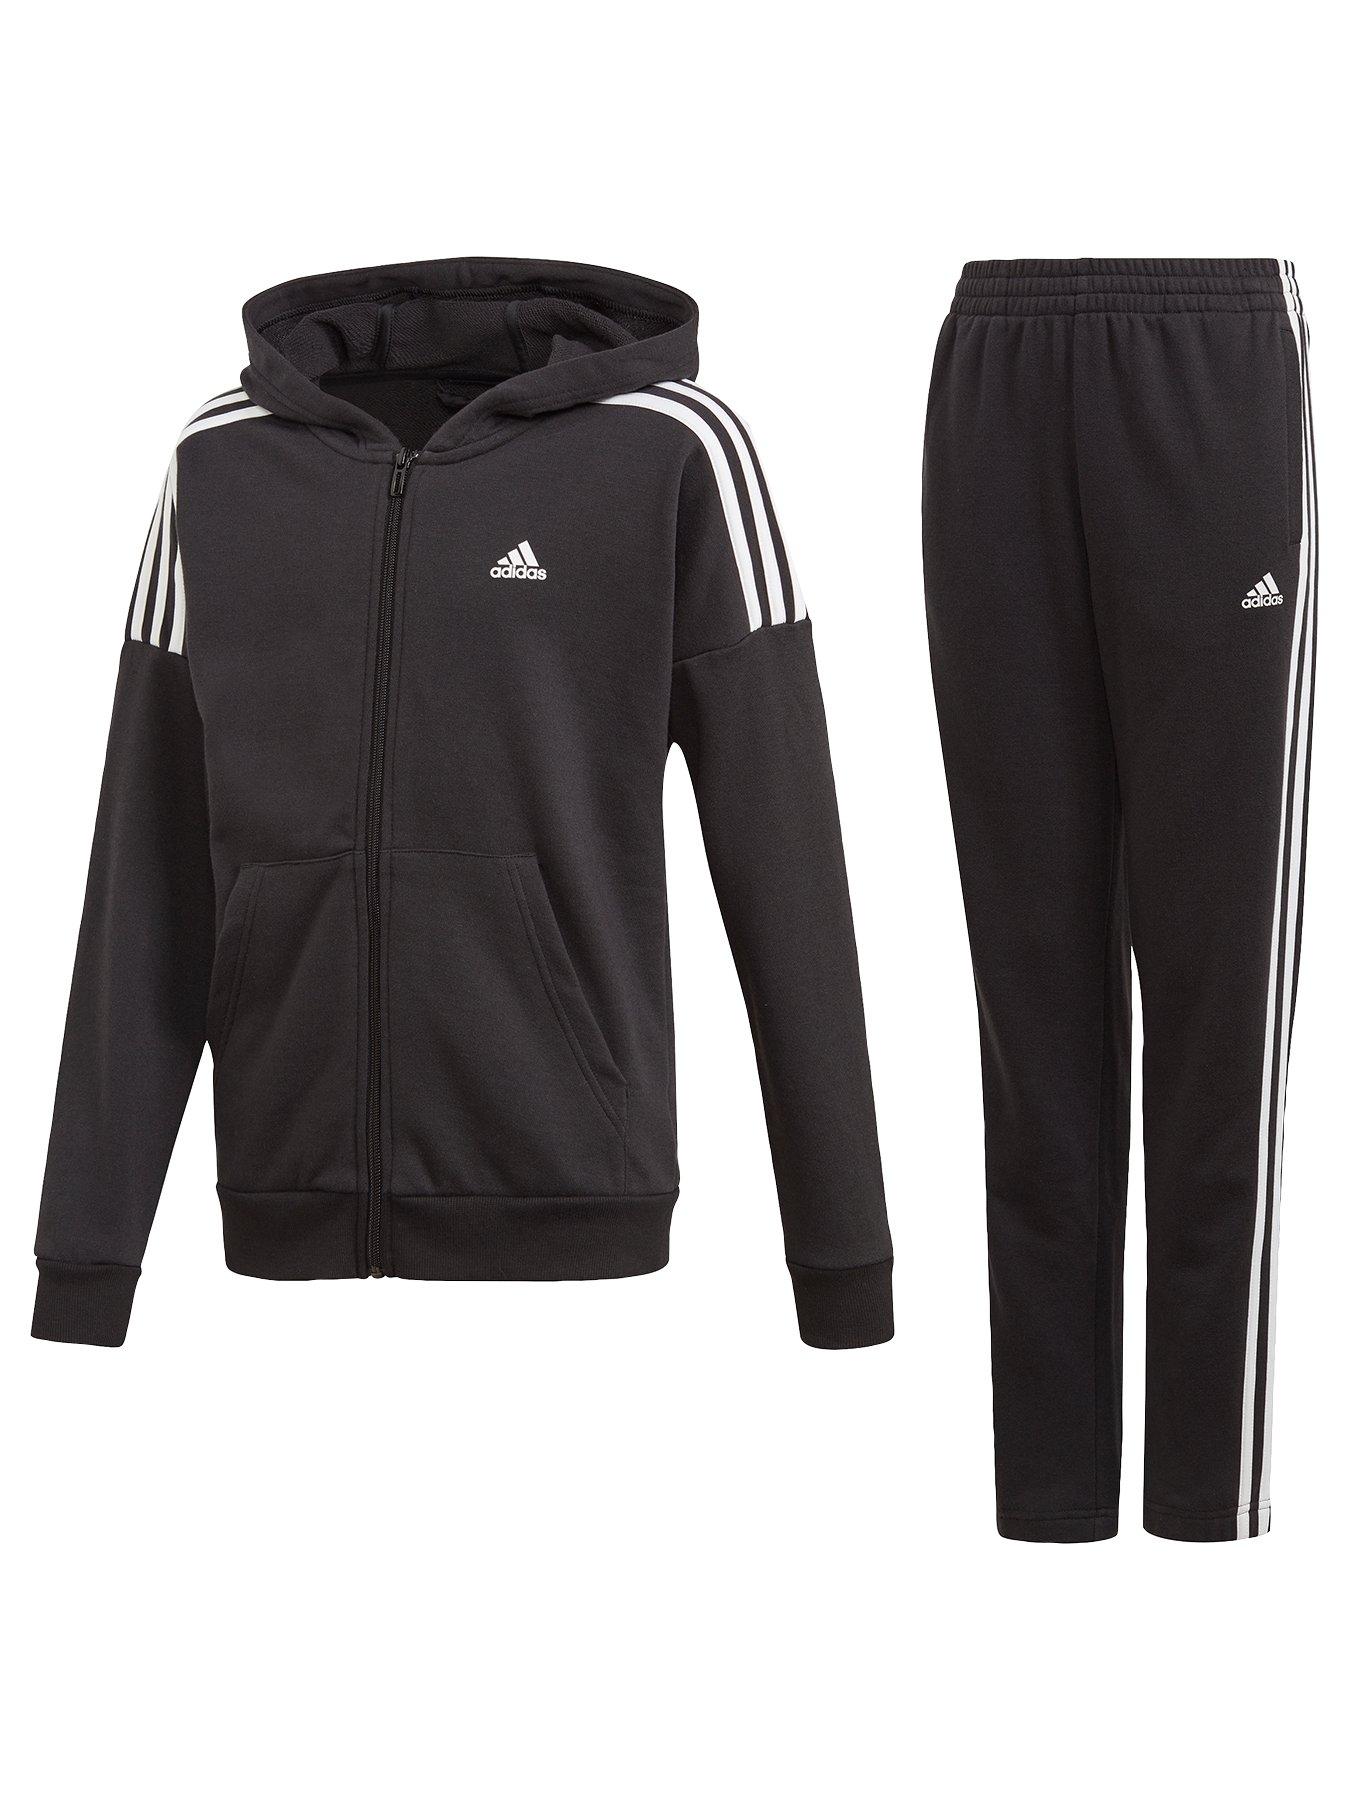 12 month adidas tracksuit